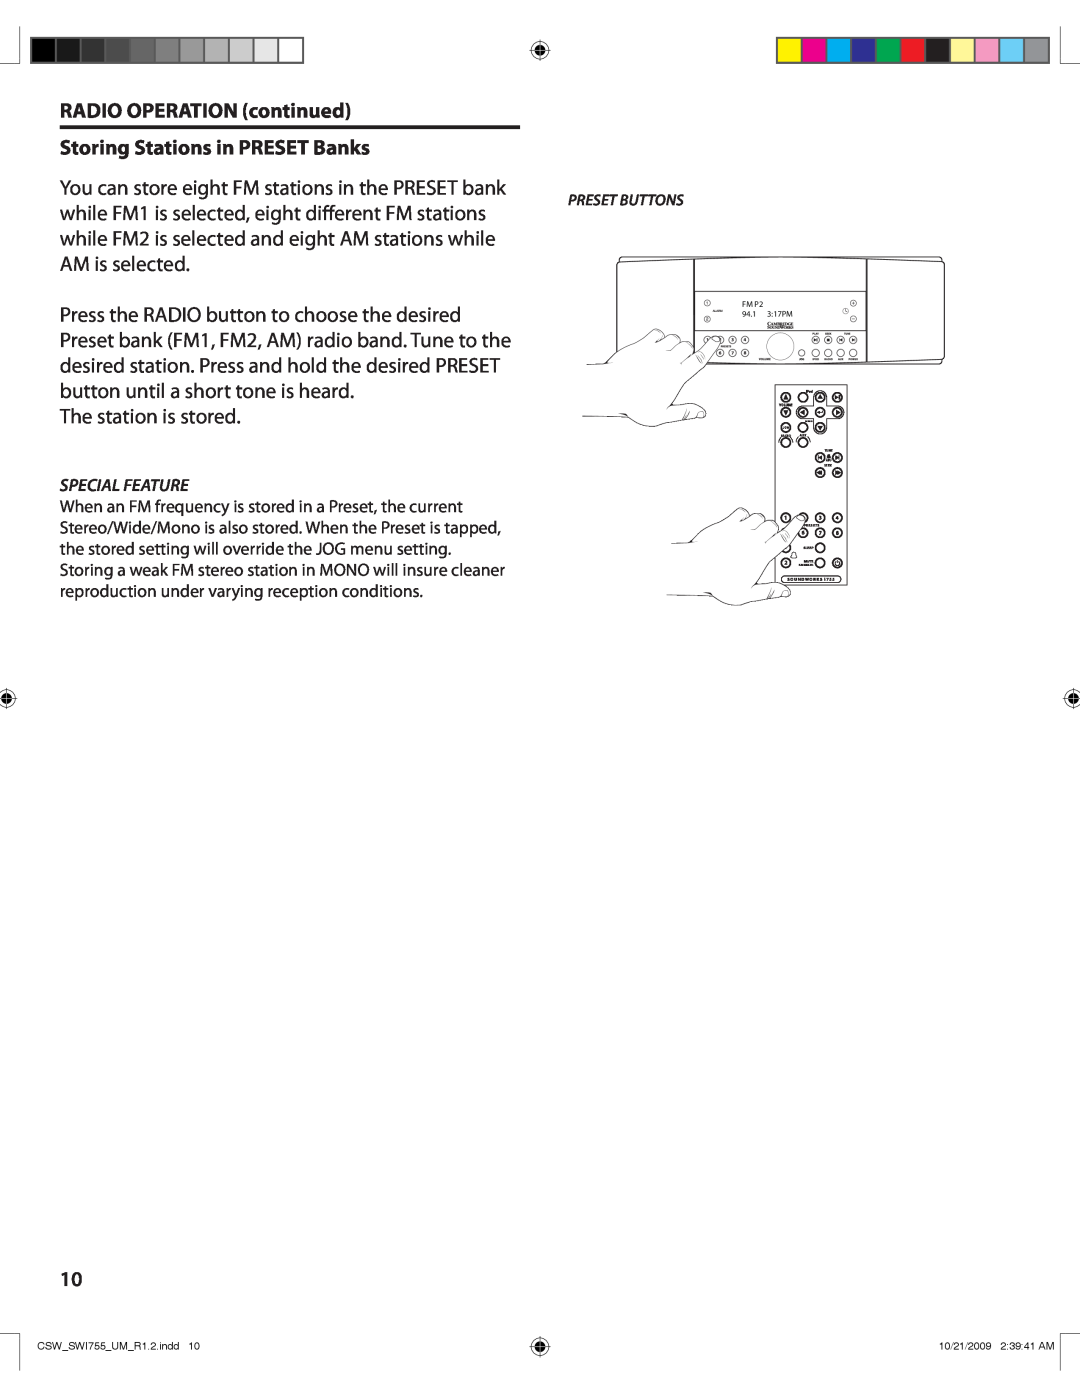 Cambridge SoundWorks I755 user manual RADIO OPERATION continued, Storing Stations in PRESET Banks 